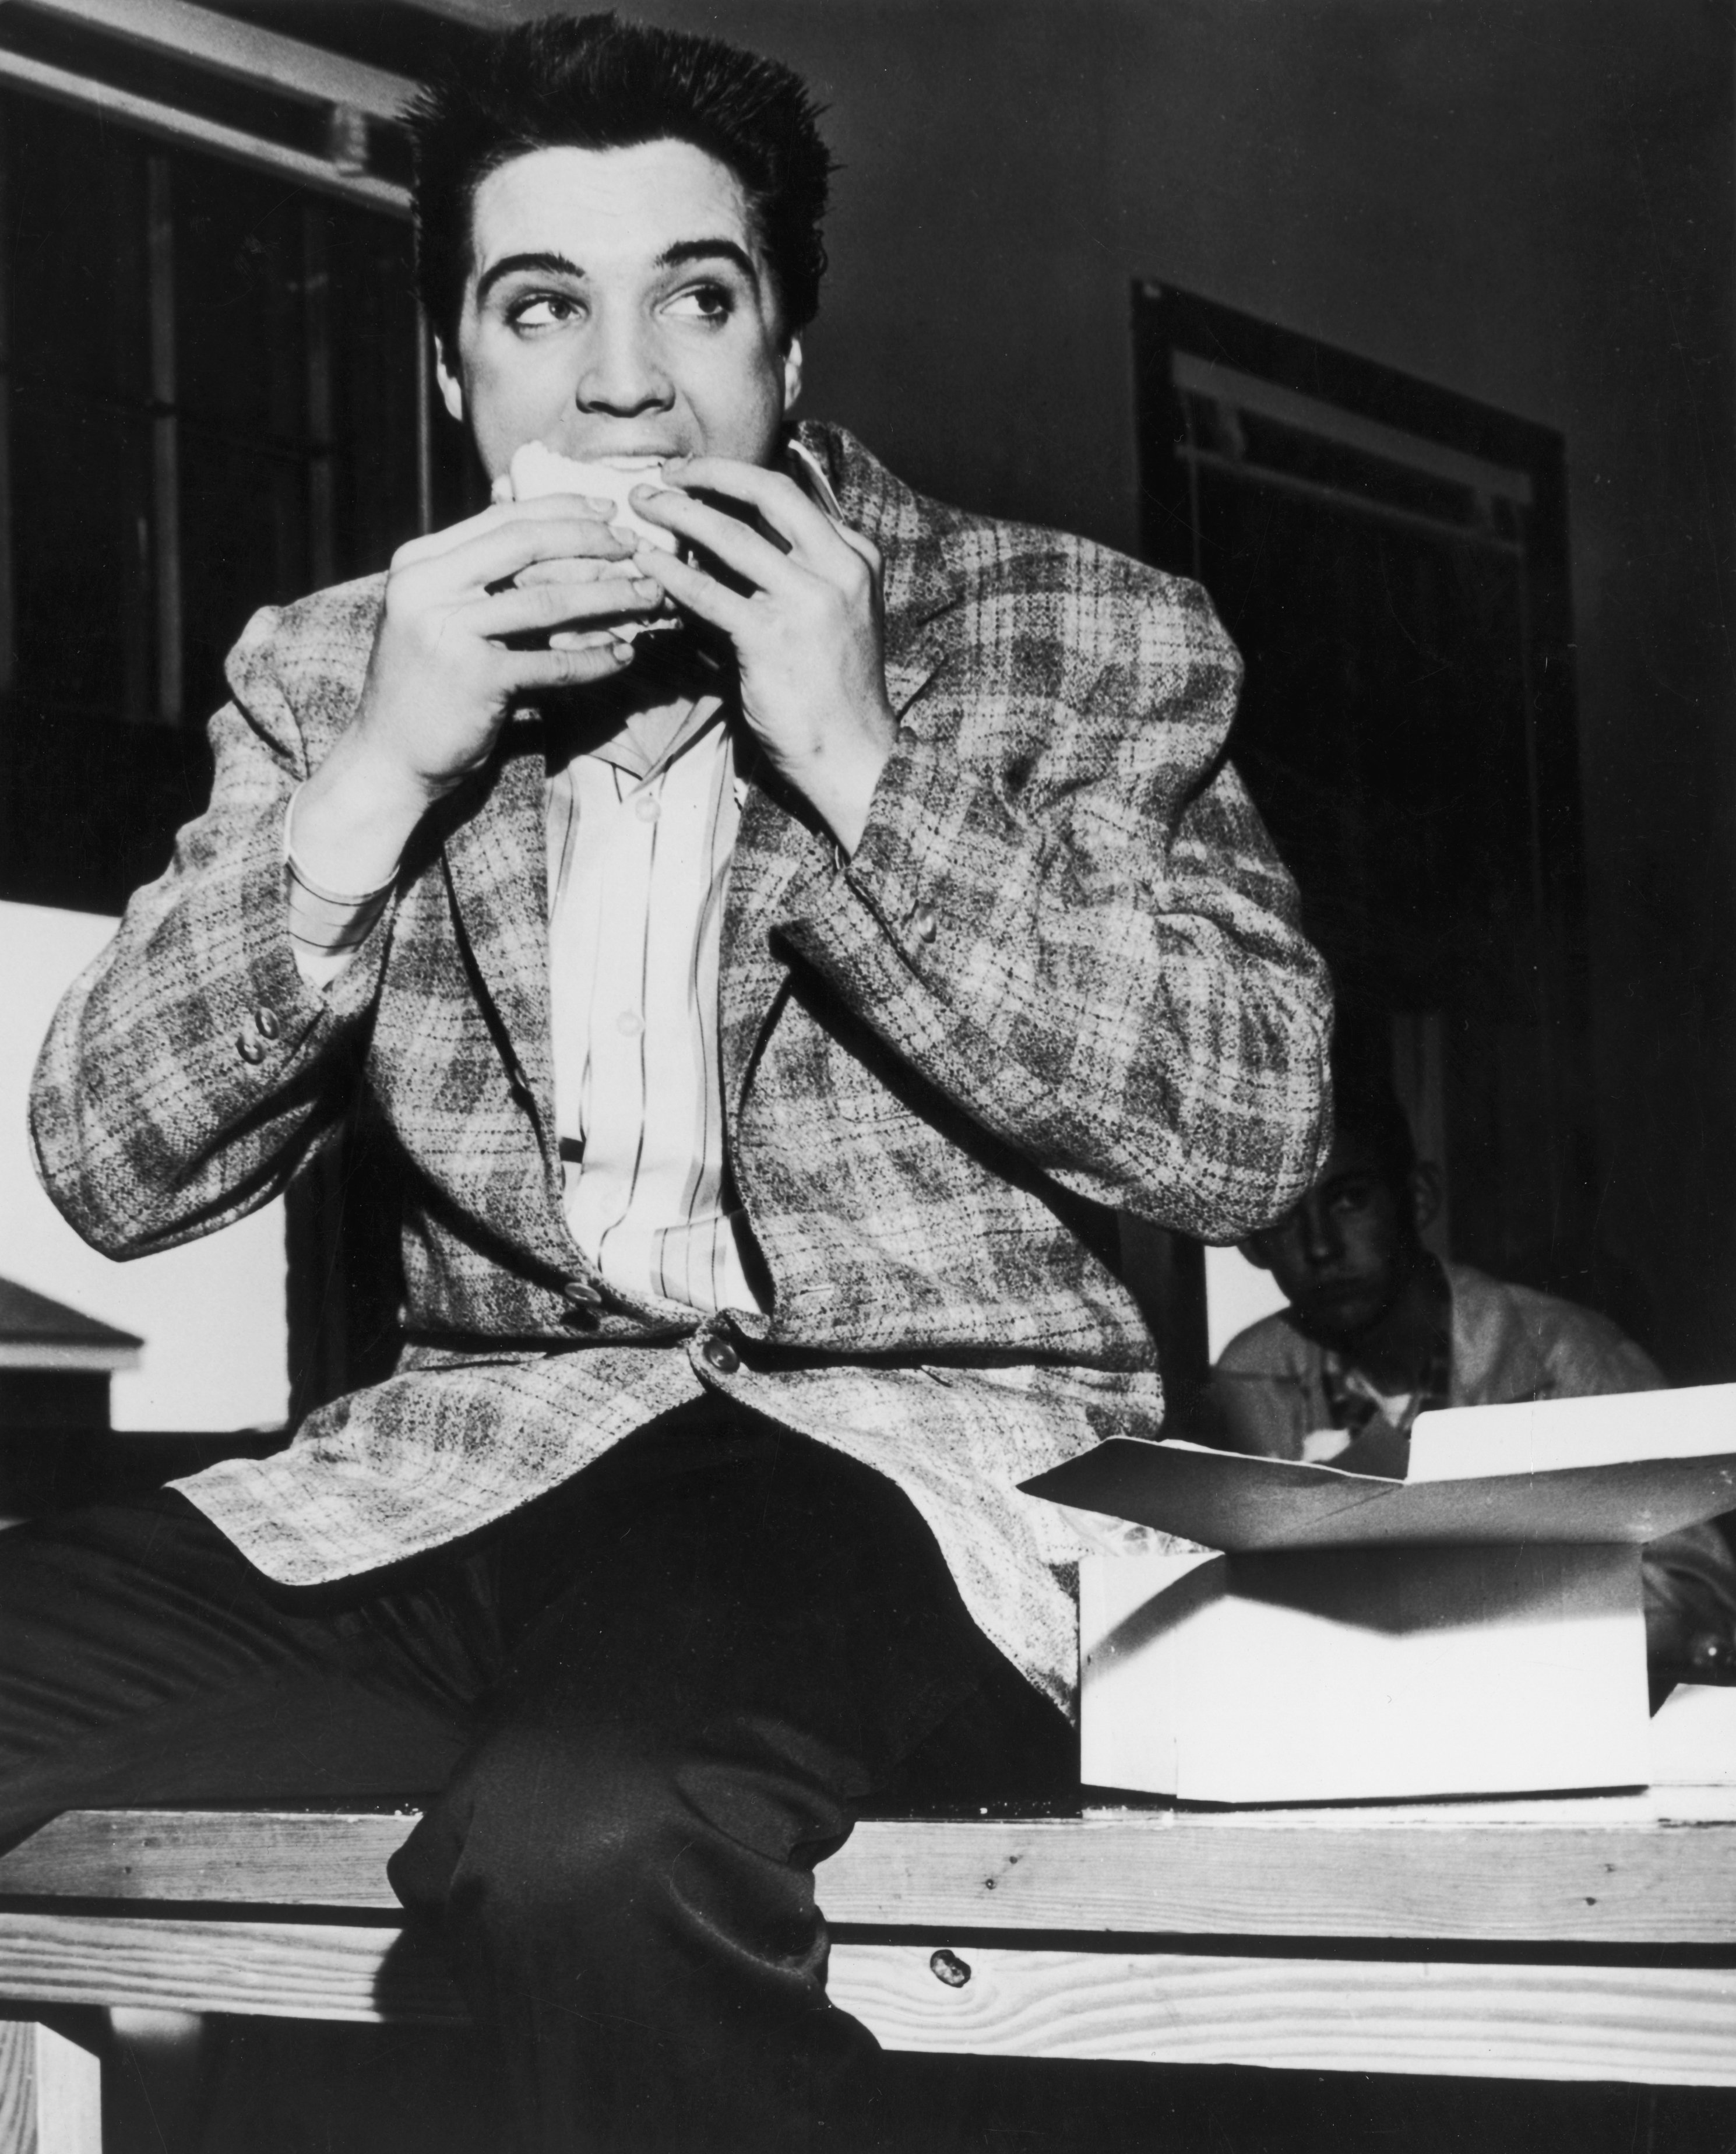 American singer and actor Elvis Presley sitting on a bench eating a sandwich on March 25, 1958, in Memphis, Tennessee | Source: Getty Images